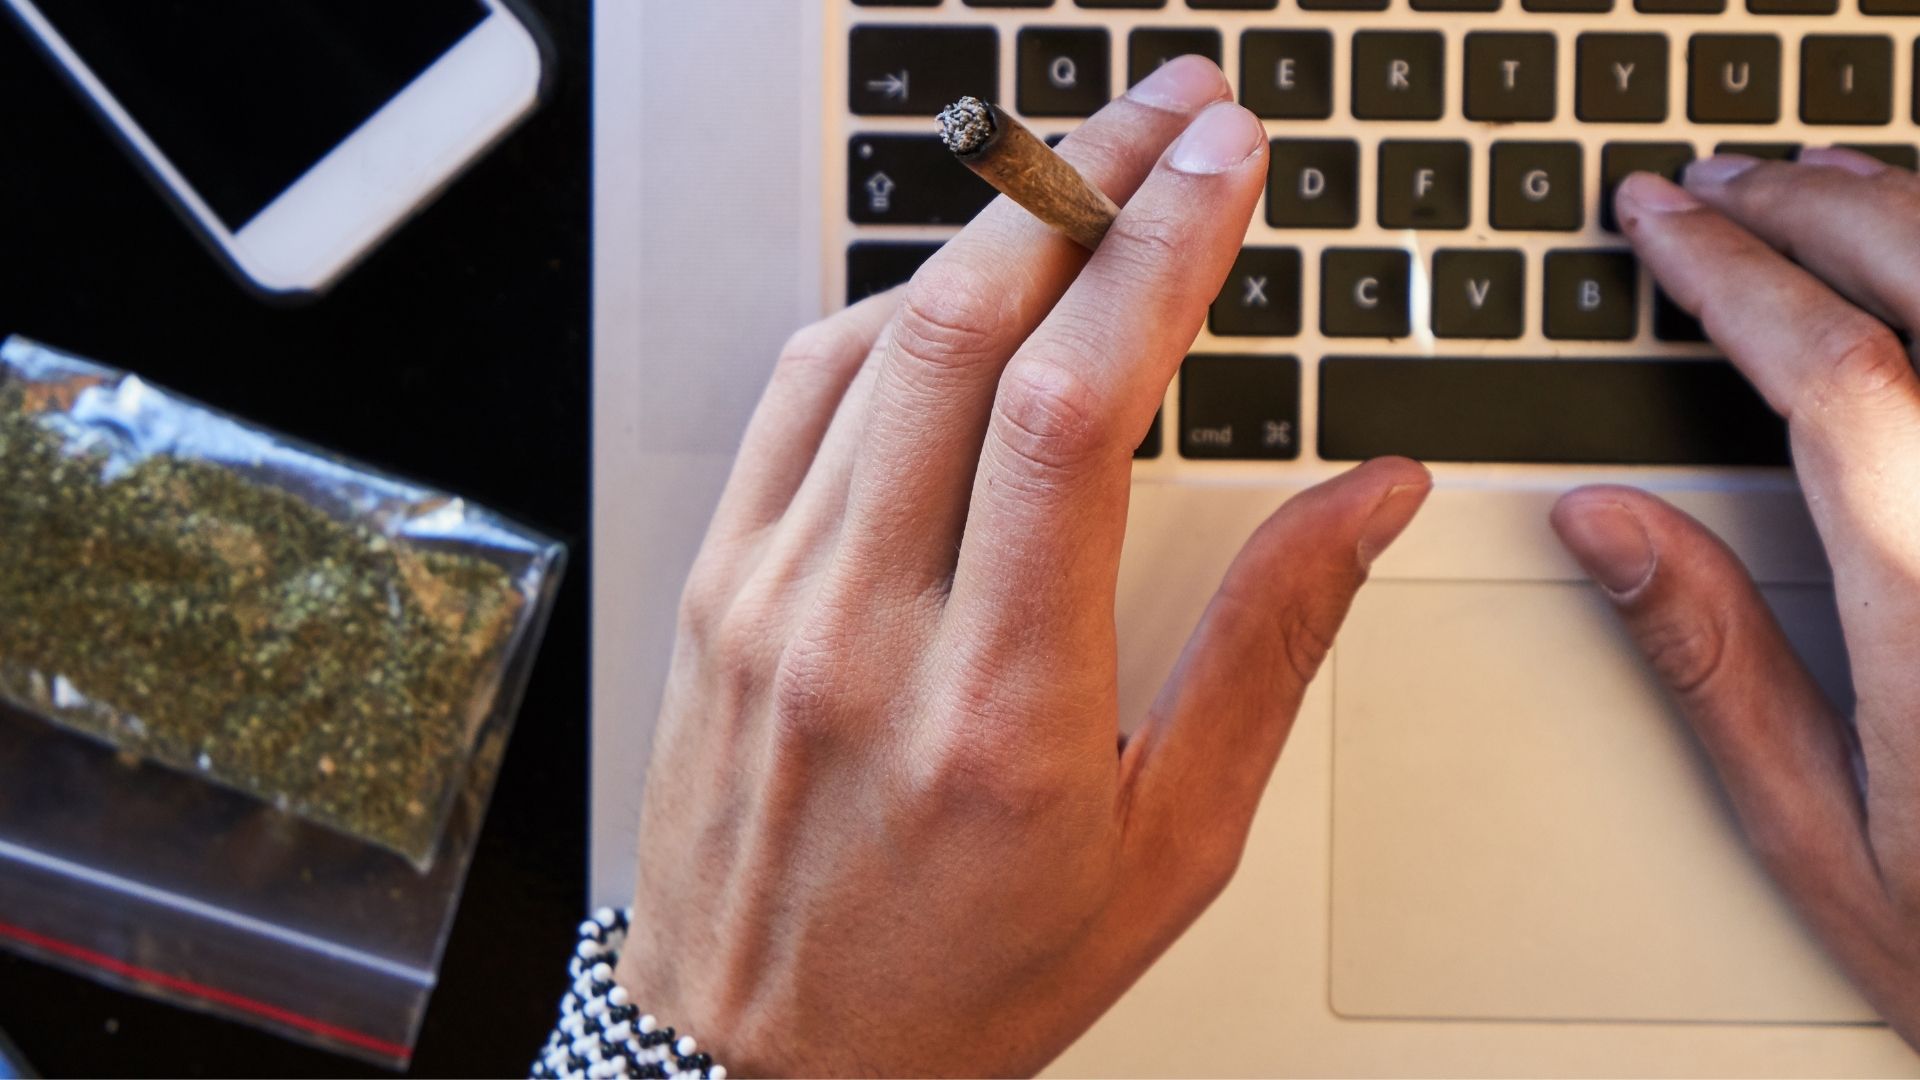 Cannabis Marketing: How to Legally Market Your Business Online